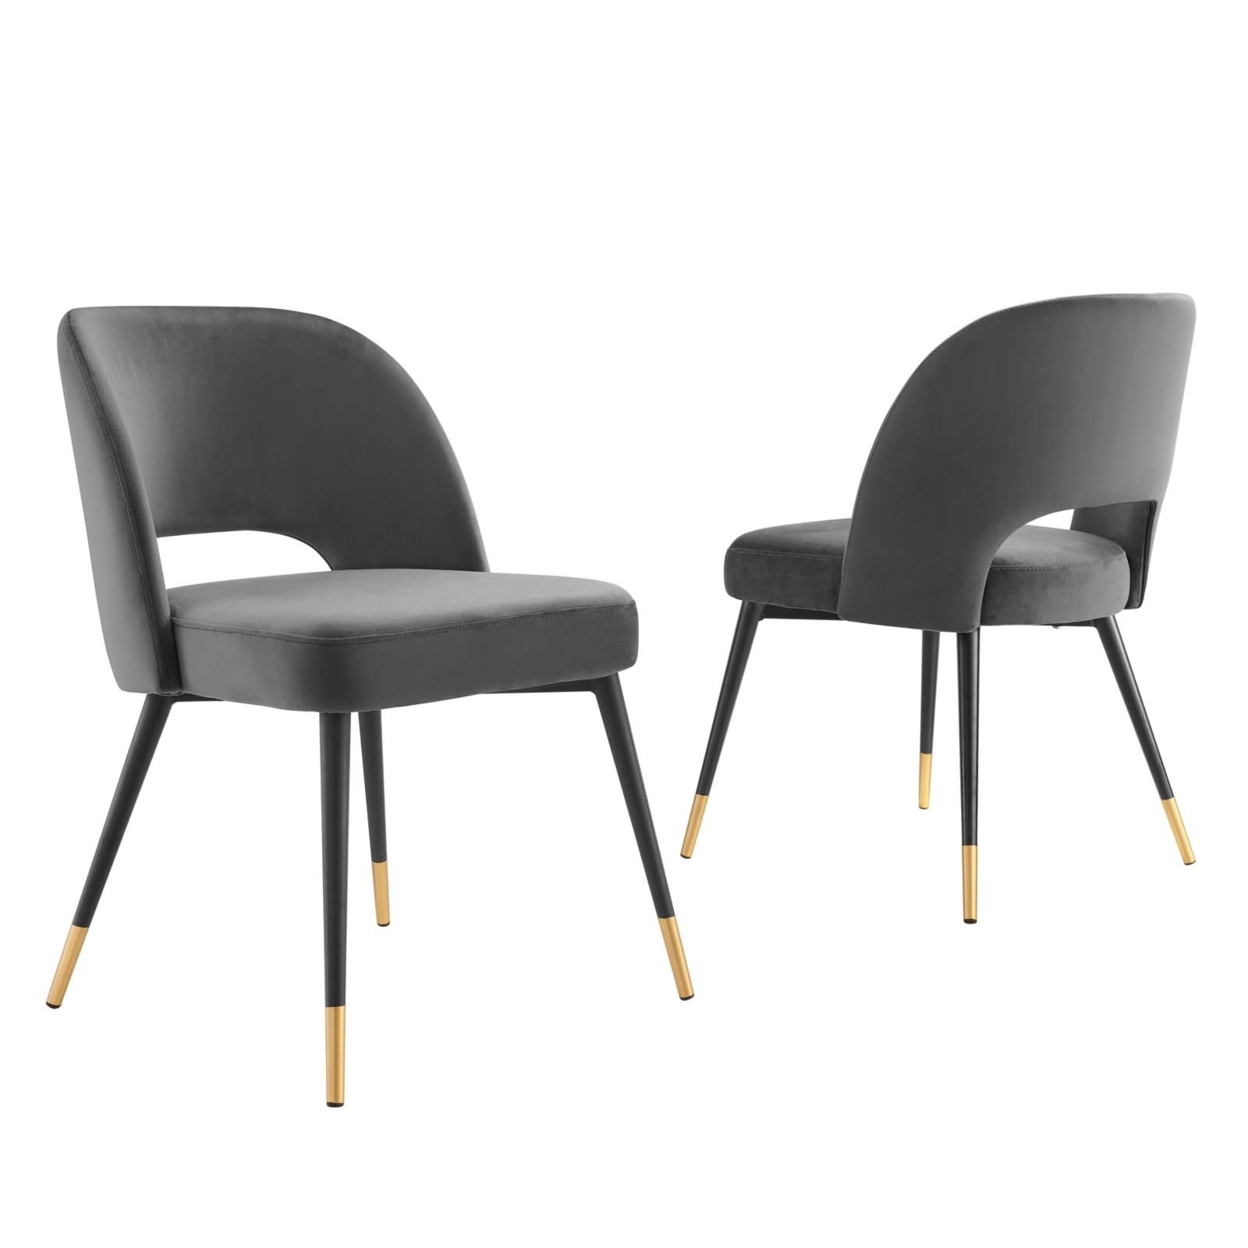 Rouse Performance Velvet Dining Side Chairs - Set Of 2, Charcoal